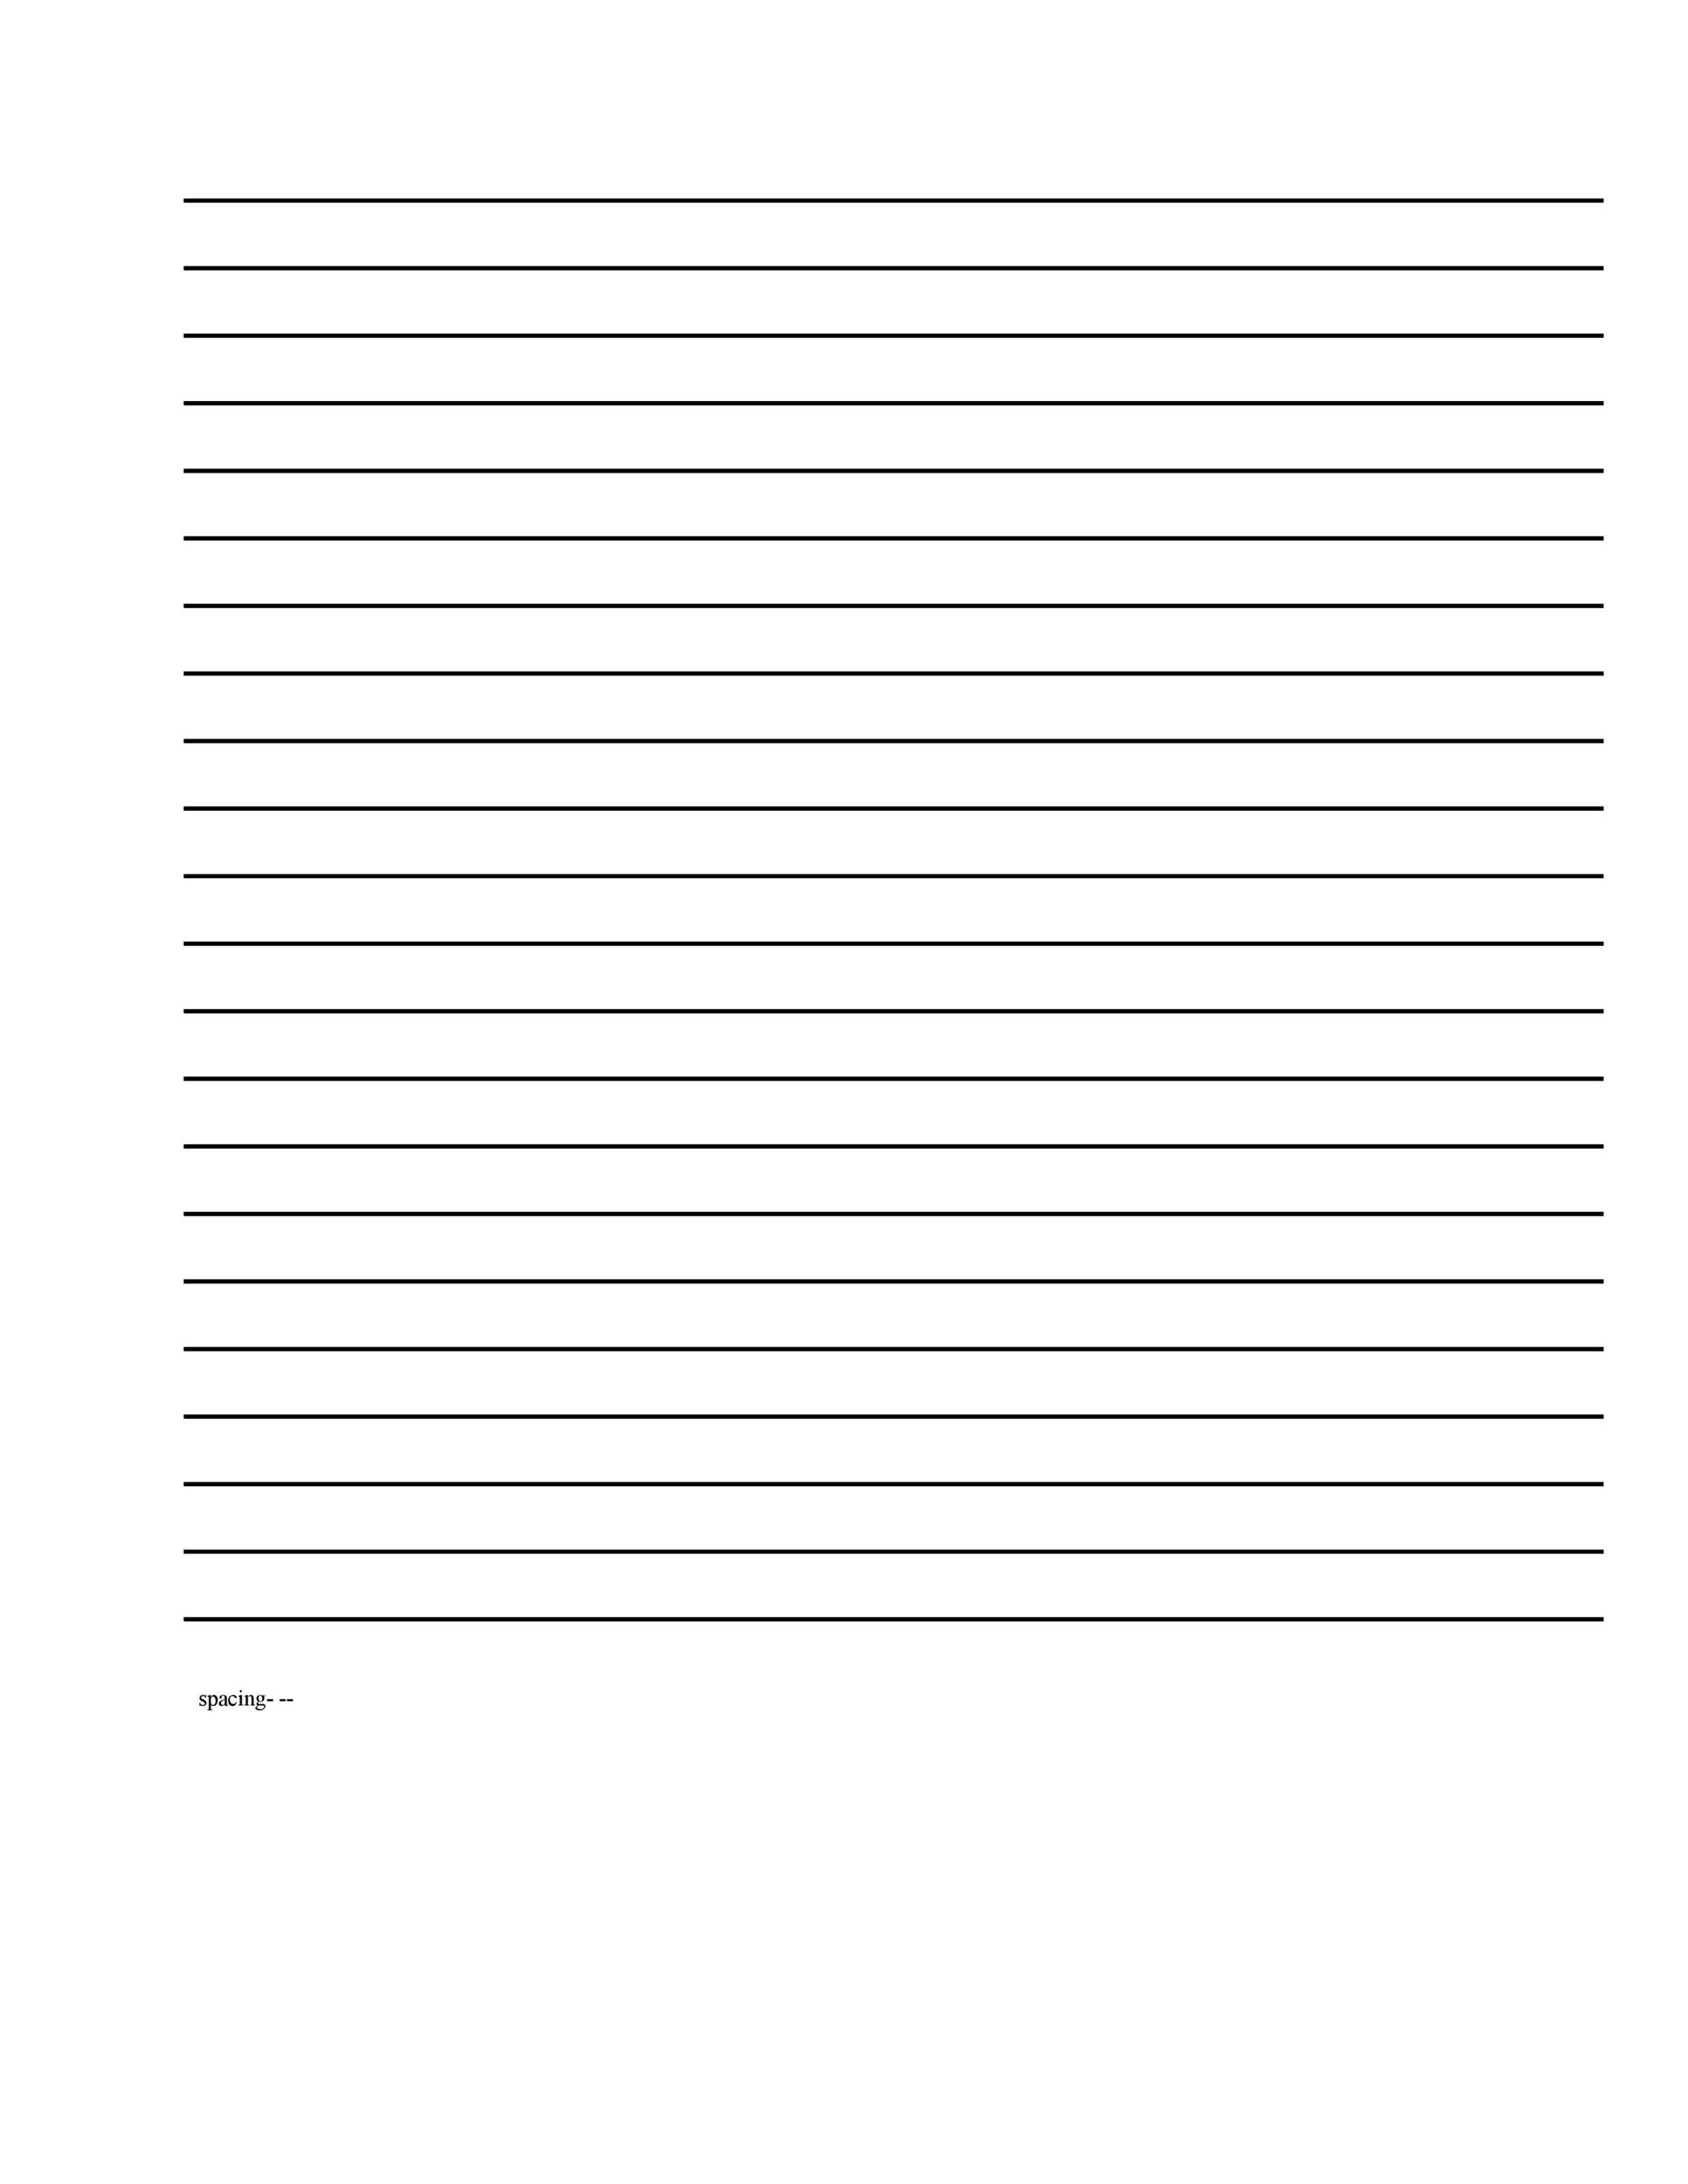 Printable Blank Paper With Lines Get What You Need For Free